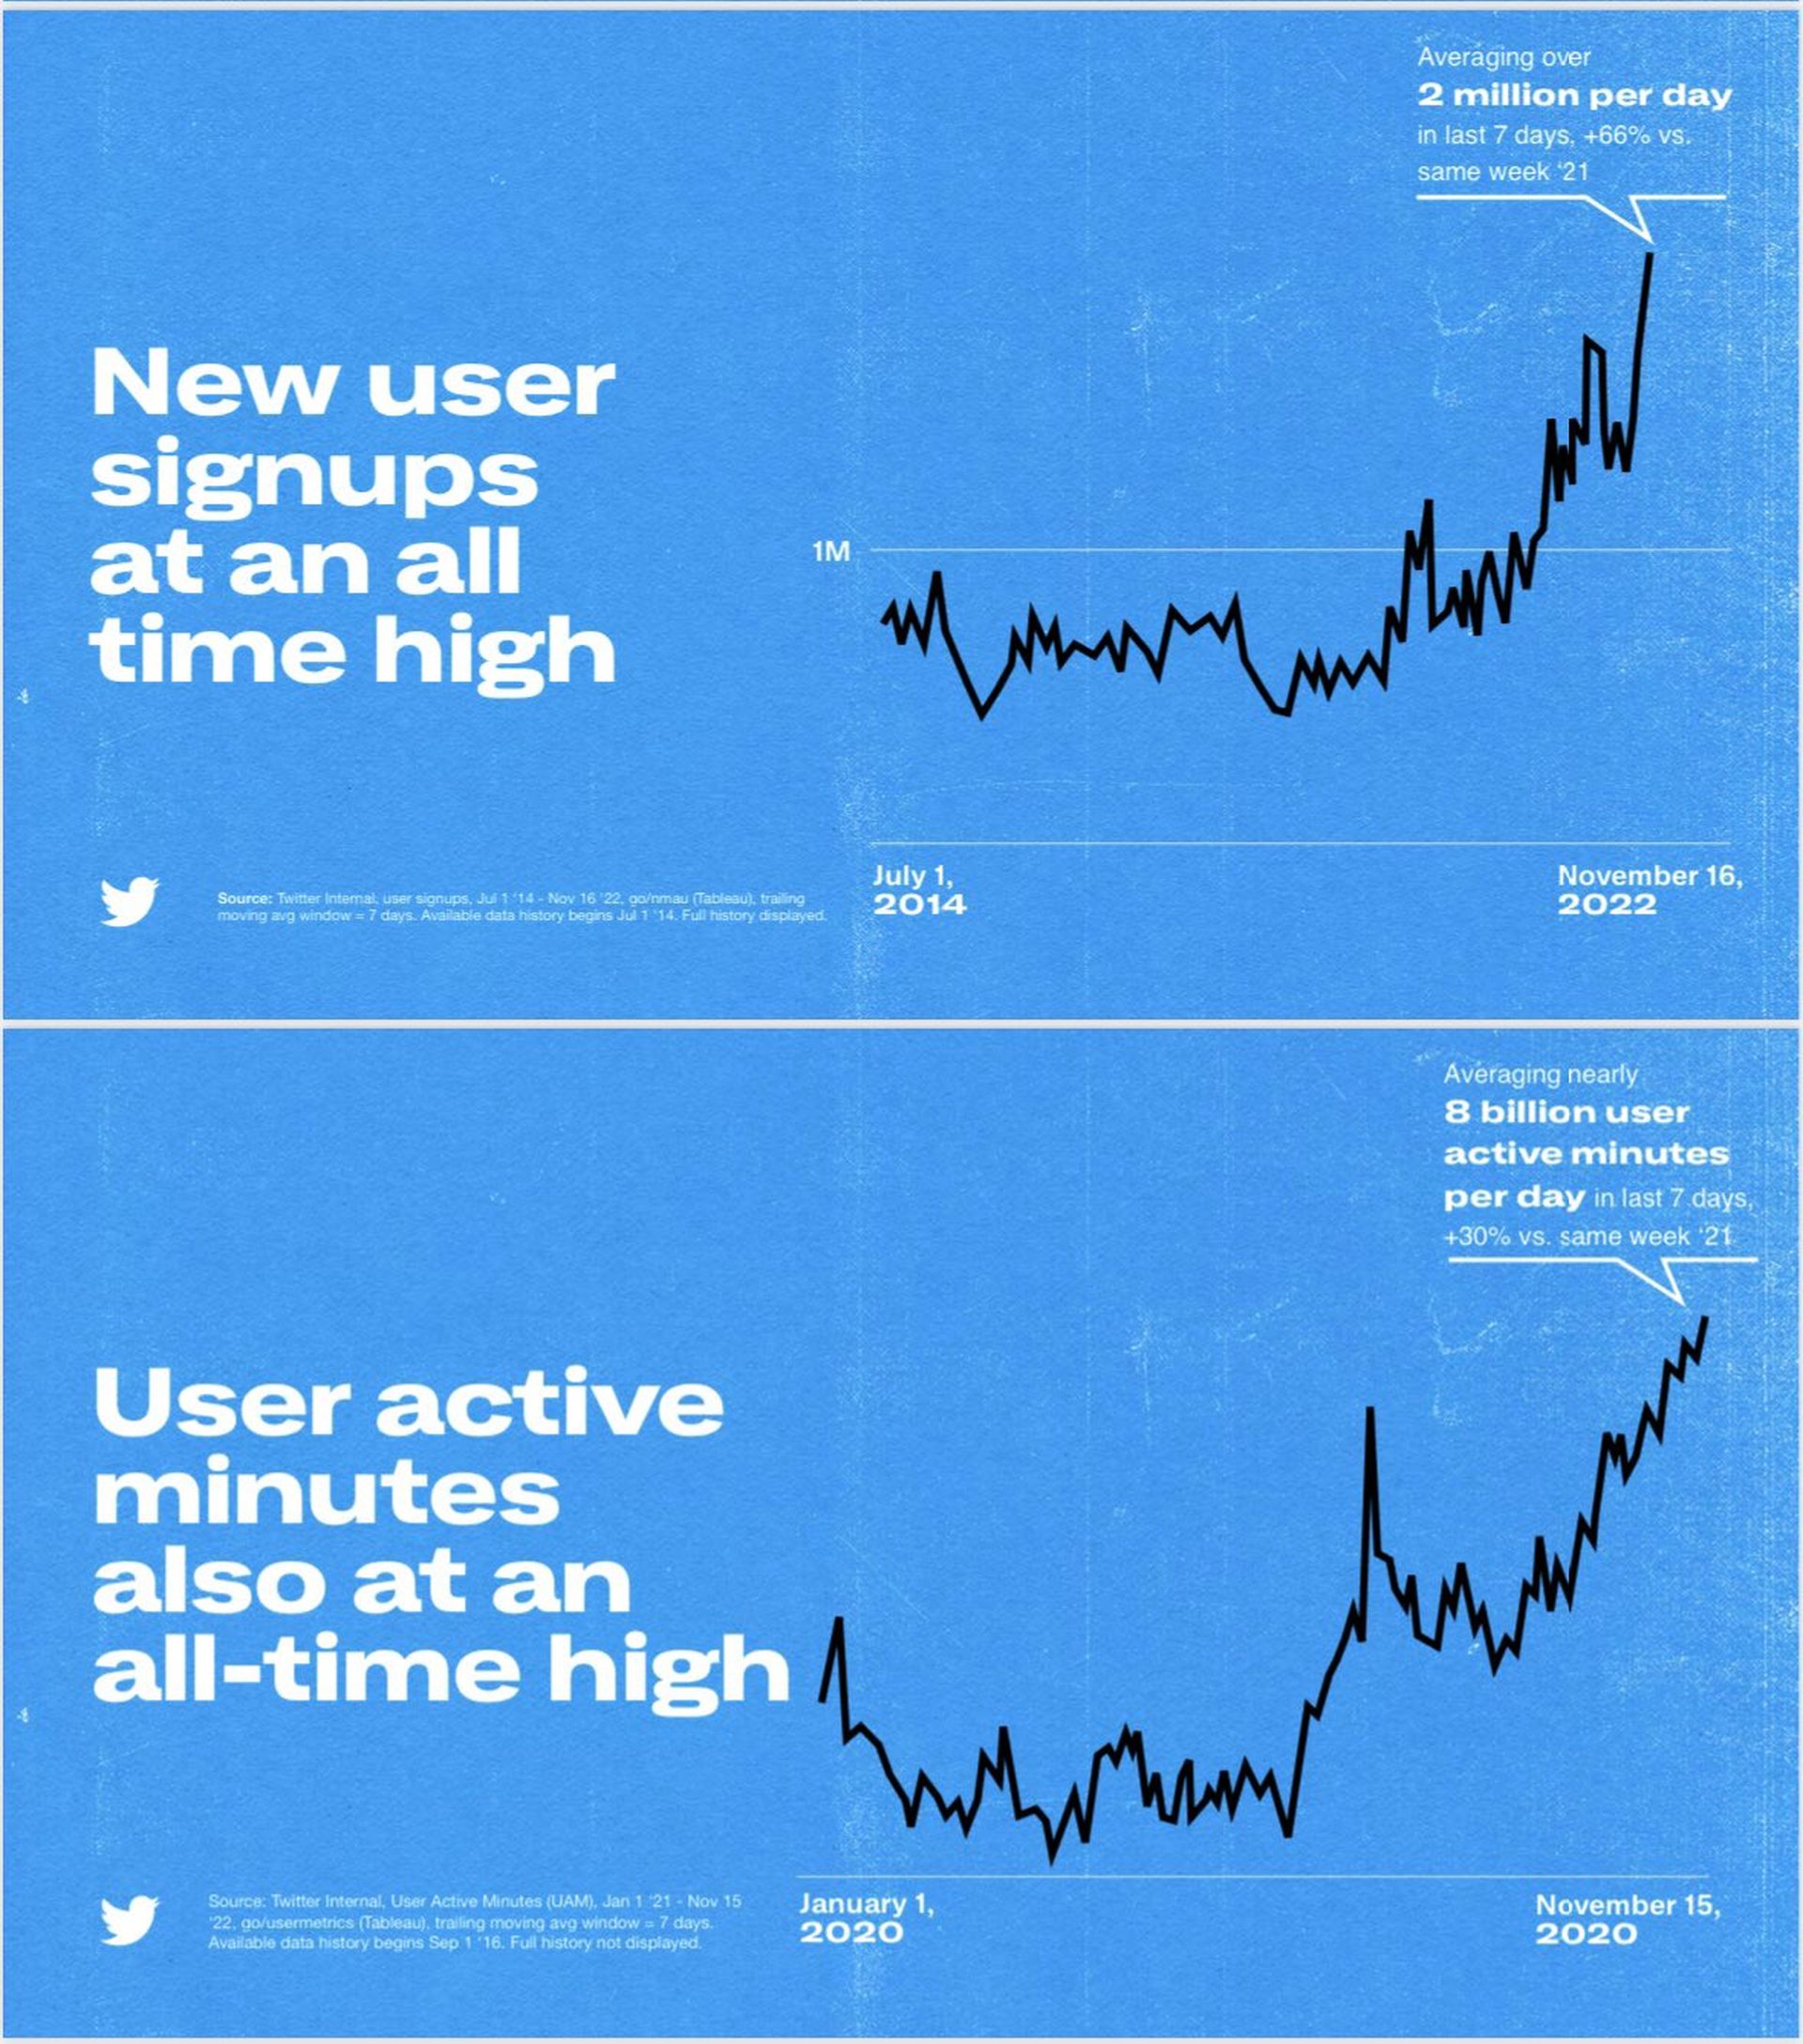 According to Musk, Twitter has peaked all-time high of new users and user active minutes